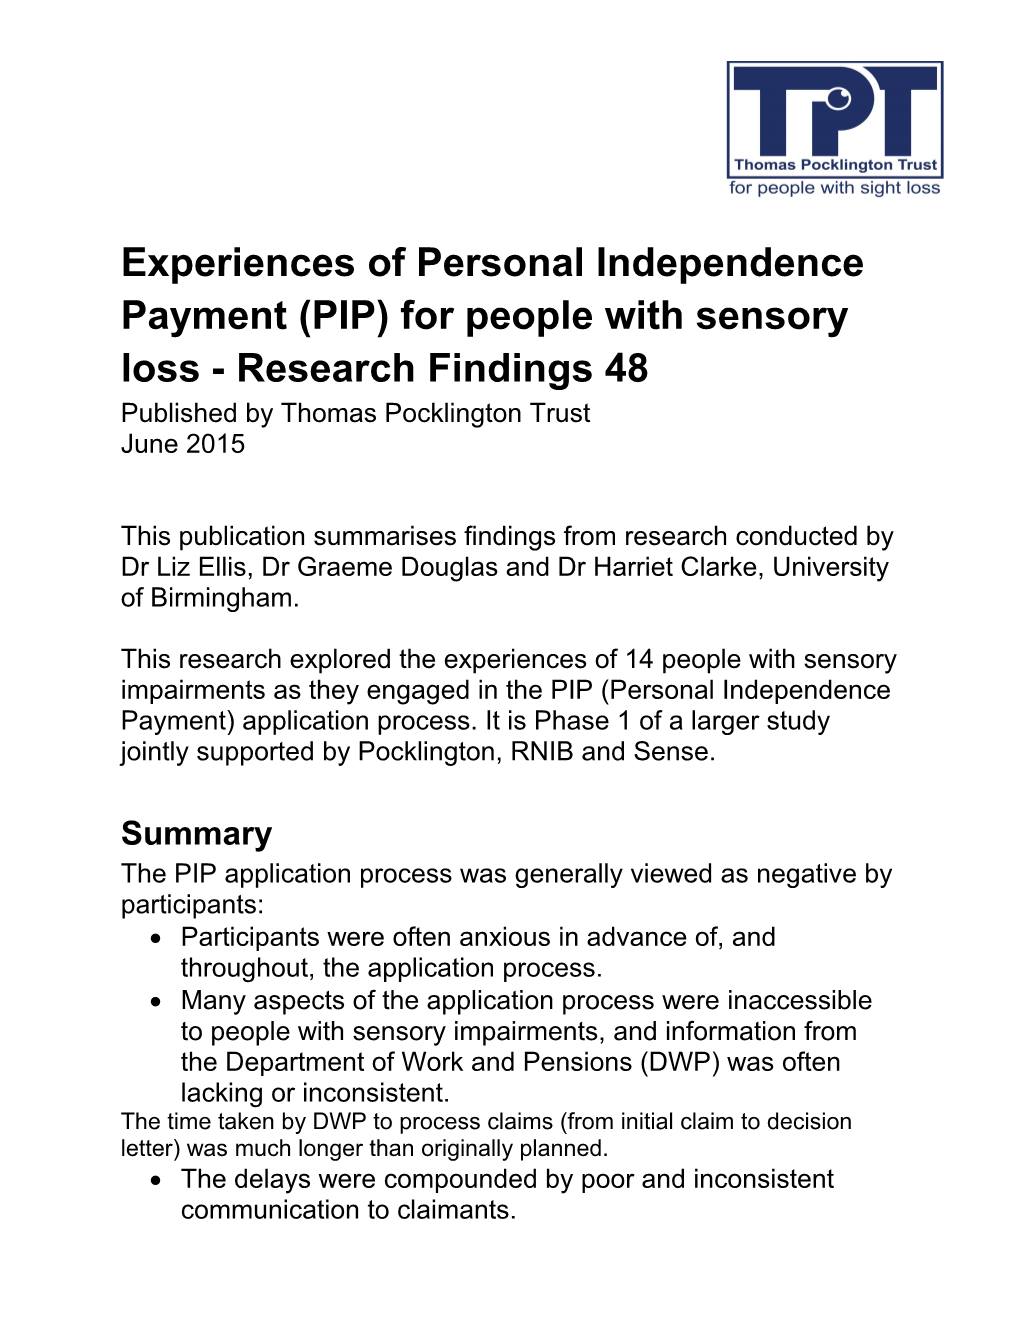 Experiences of Personal Independence Payment (PIP) for People with Sensory Loss - Research